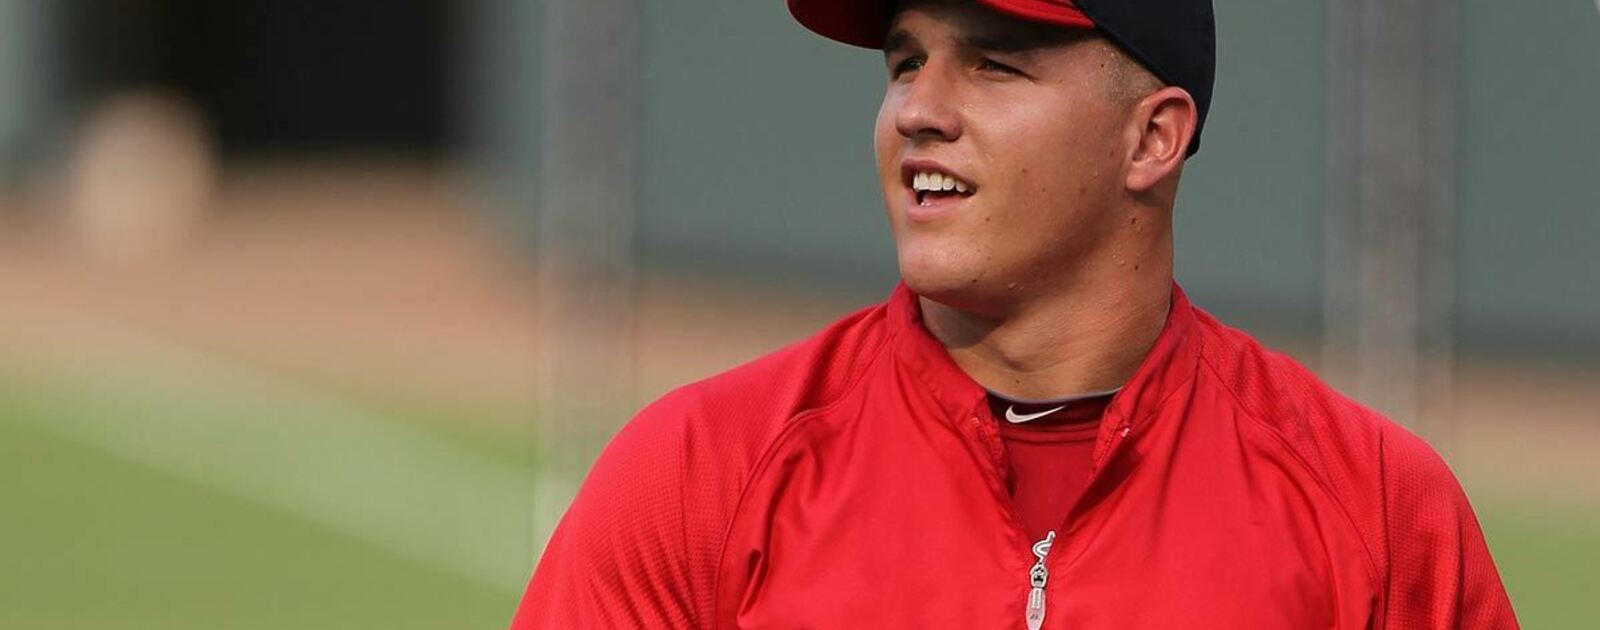 Mike Trout close to signing record-breaking $432 million contract